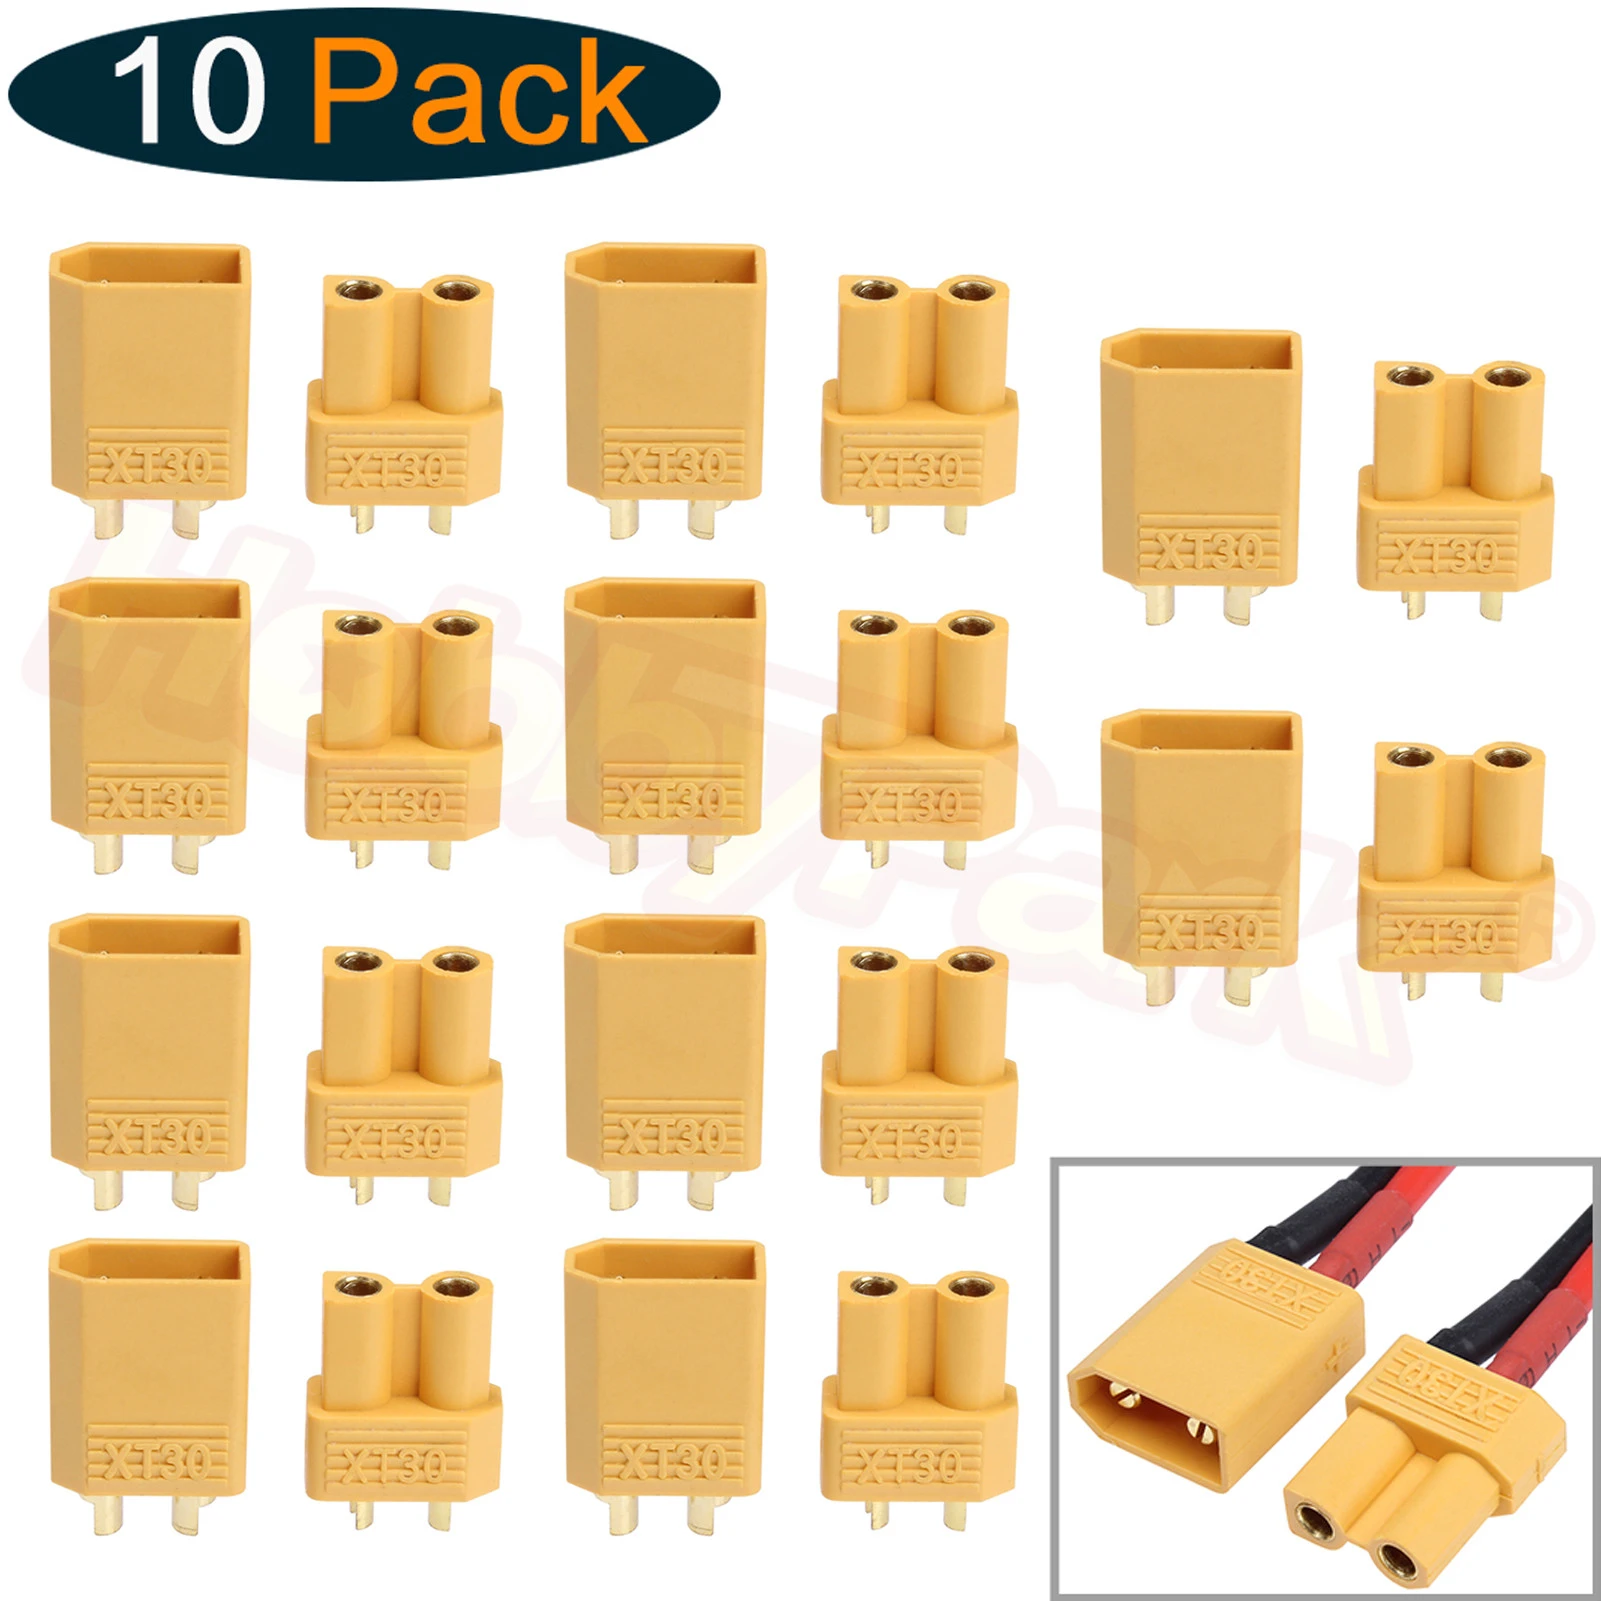 Hobbypark 5 Pairs XT90 Bullet Connectors Male Female Power Plugs with Heat Shrink Tubing for RC Lipo Battery Pack Motor 